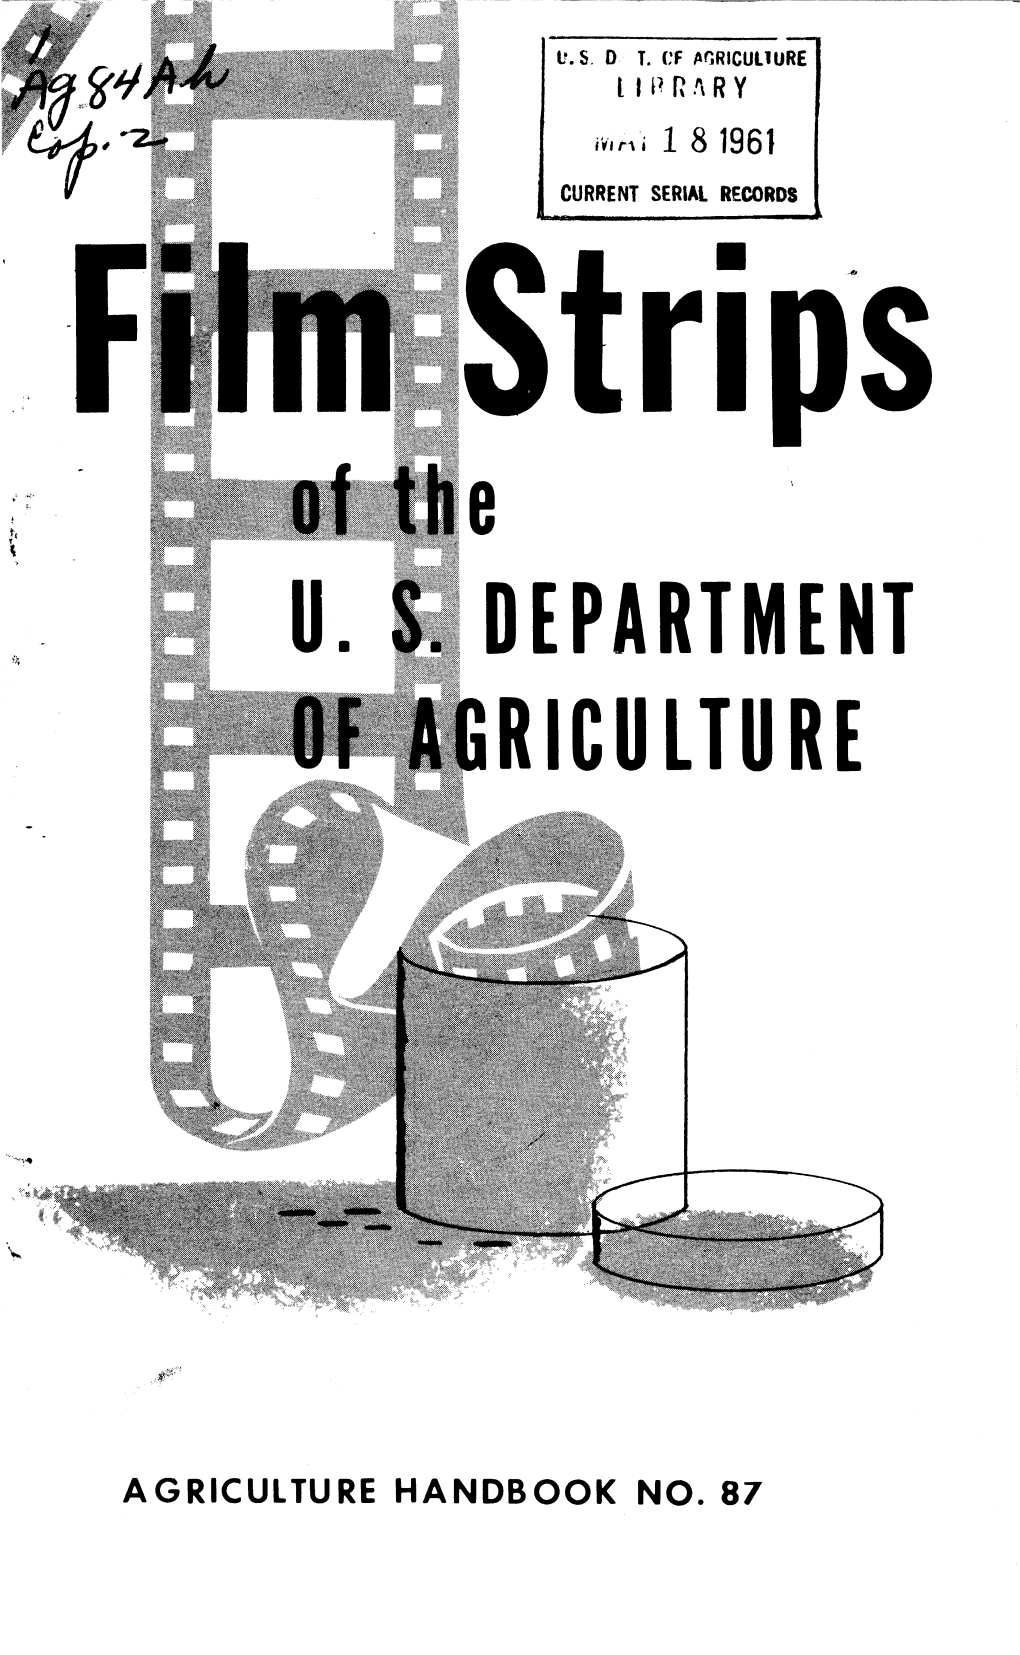 Of the U. S. DEPARTMENT of AGRICULTURE